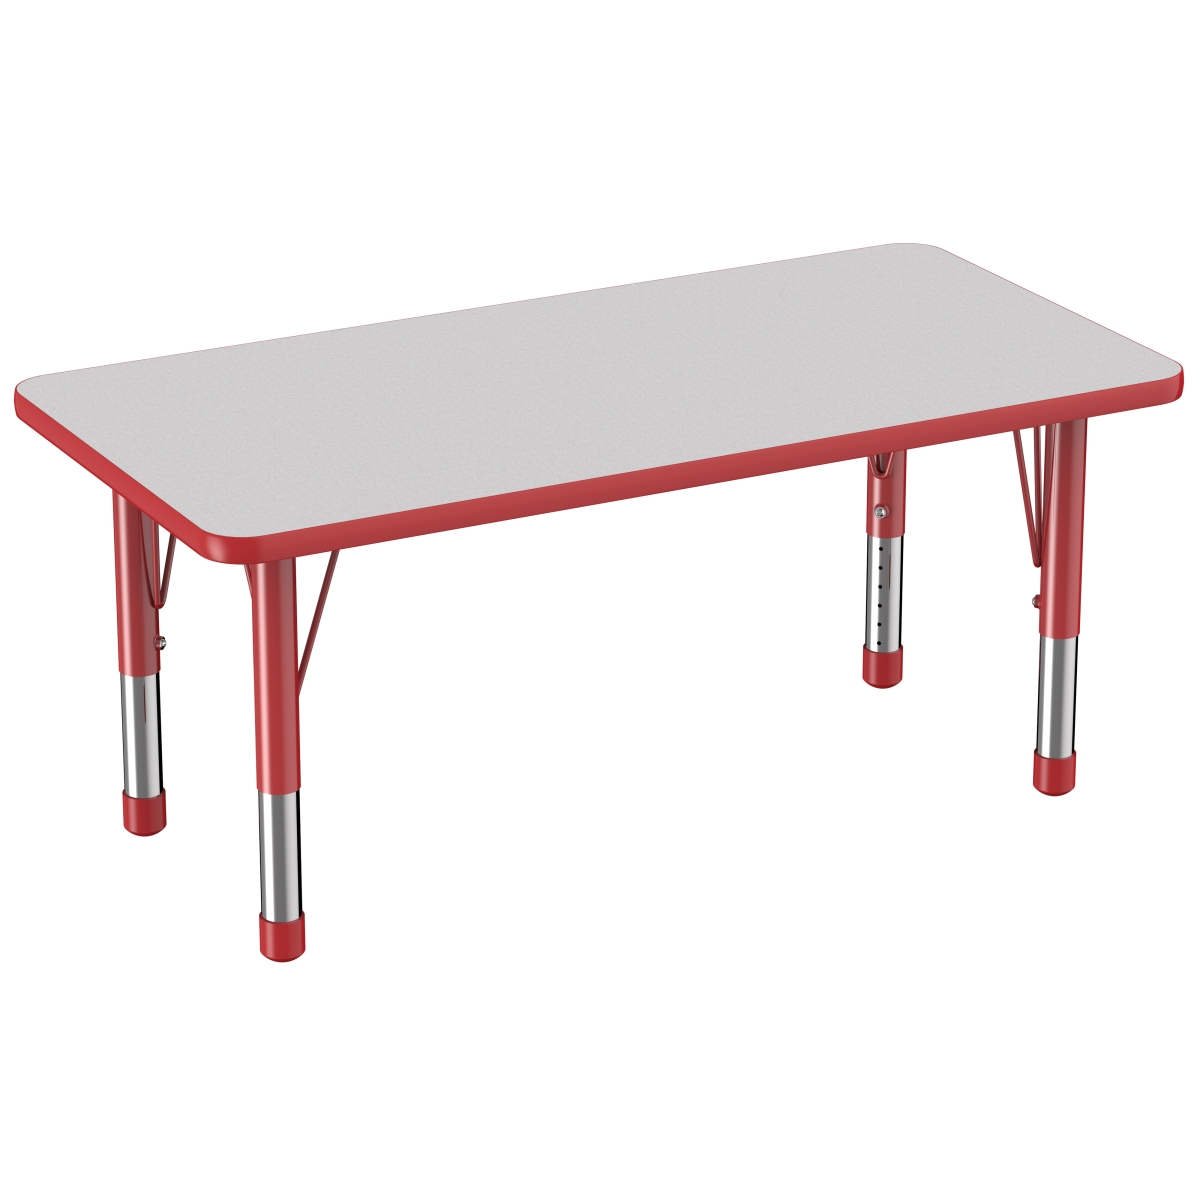 10009-gyrd 24 X 48 In. Rectangle T-mold Adjustable Activity Table With Chunky Leg - Grey & Red